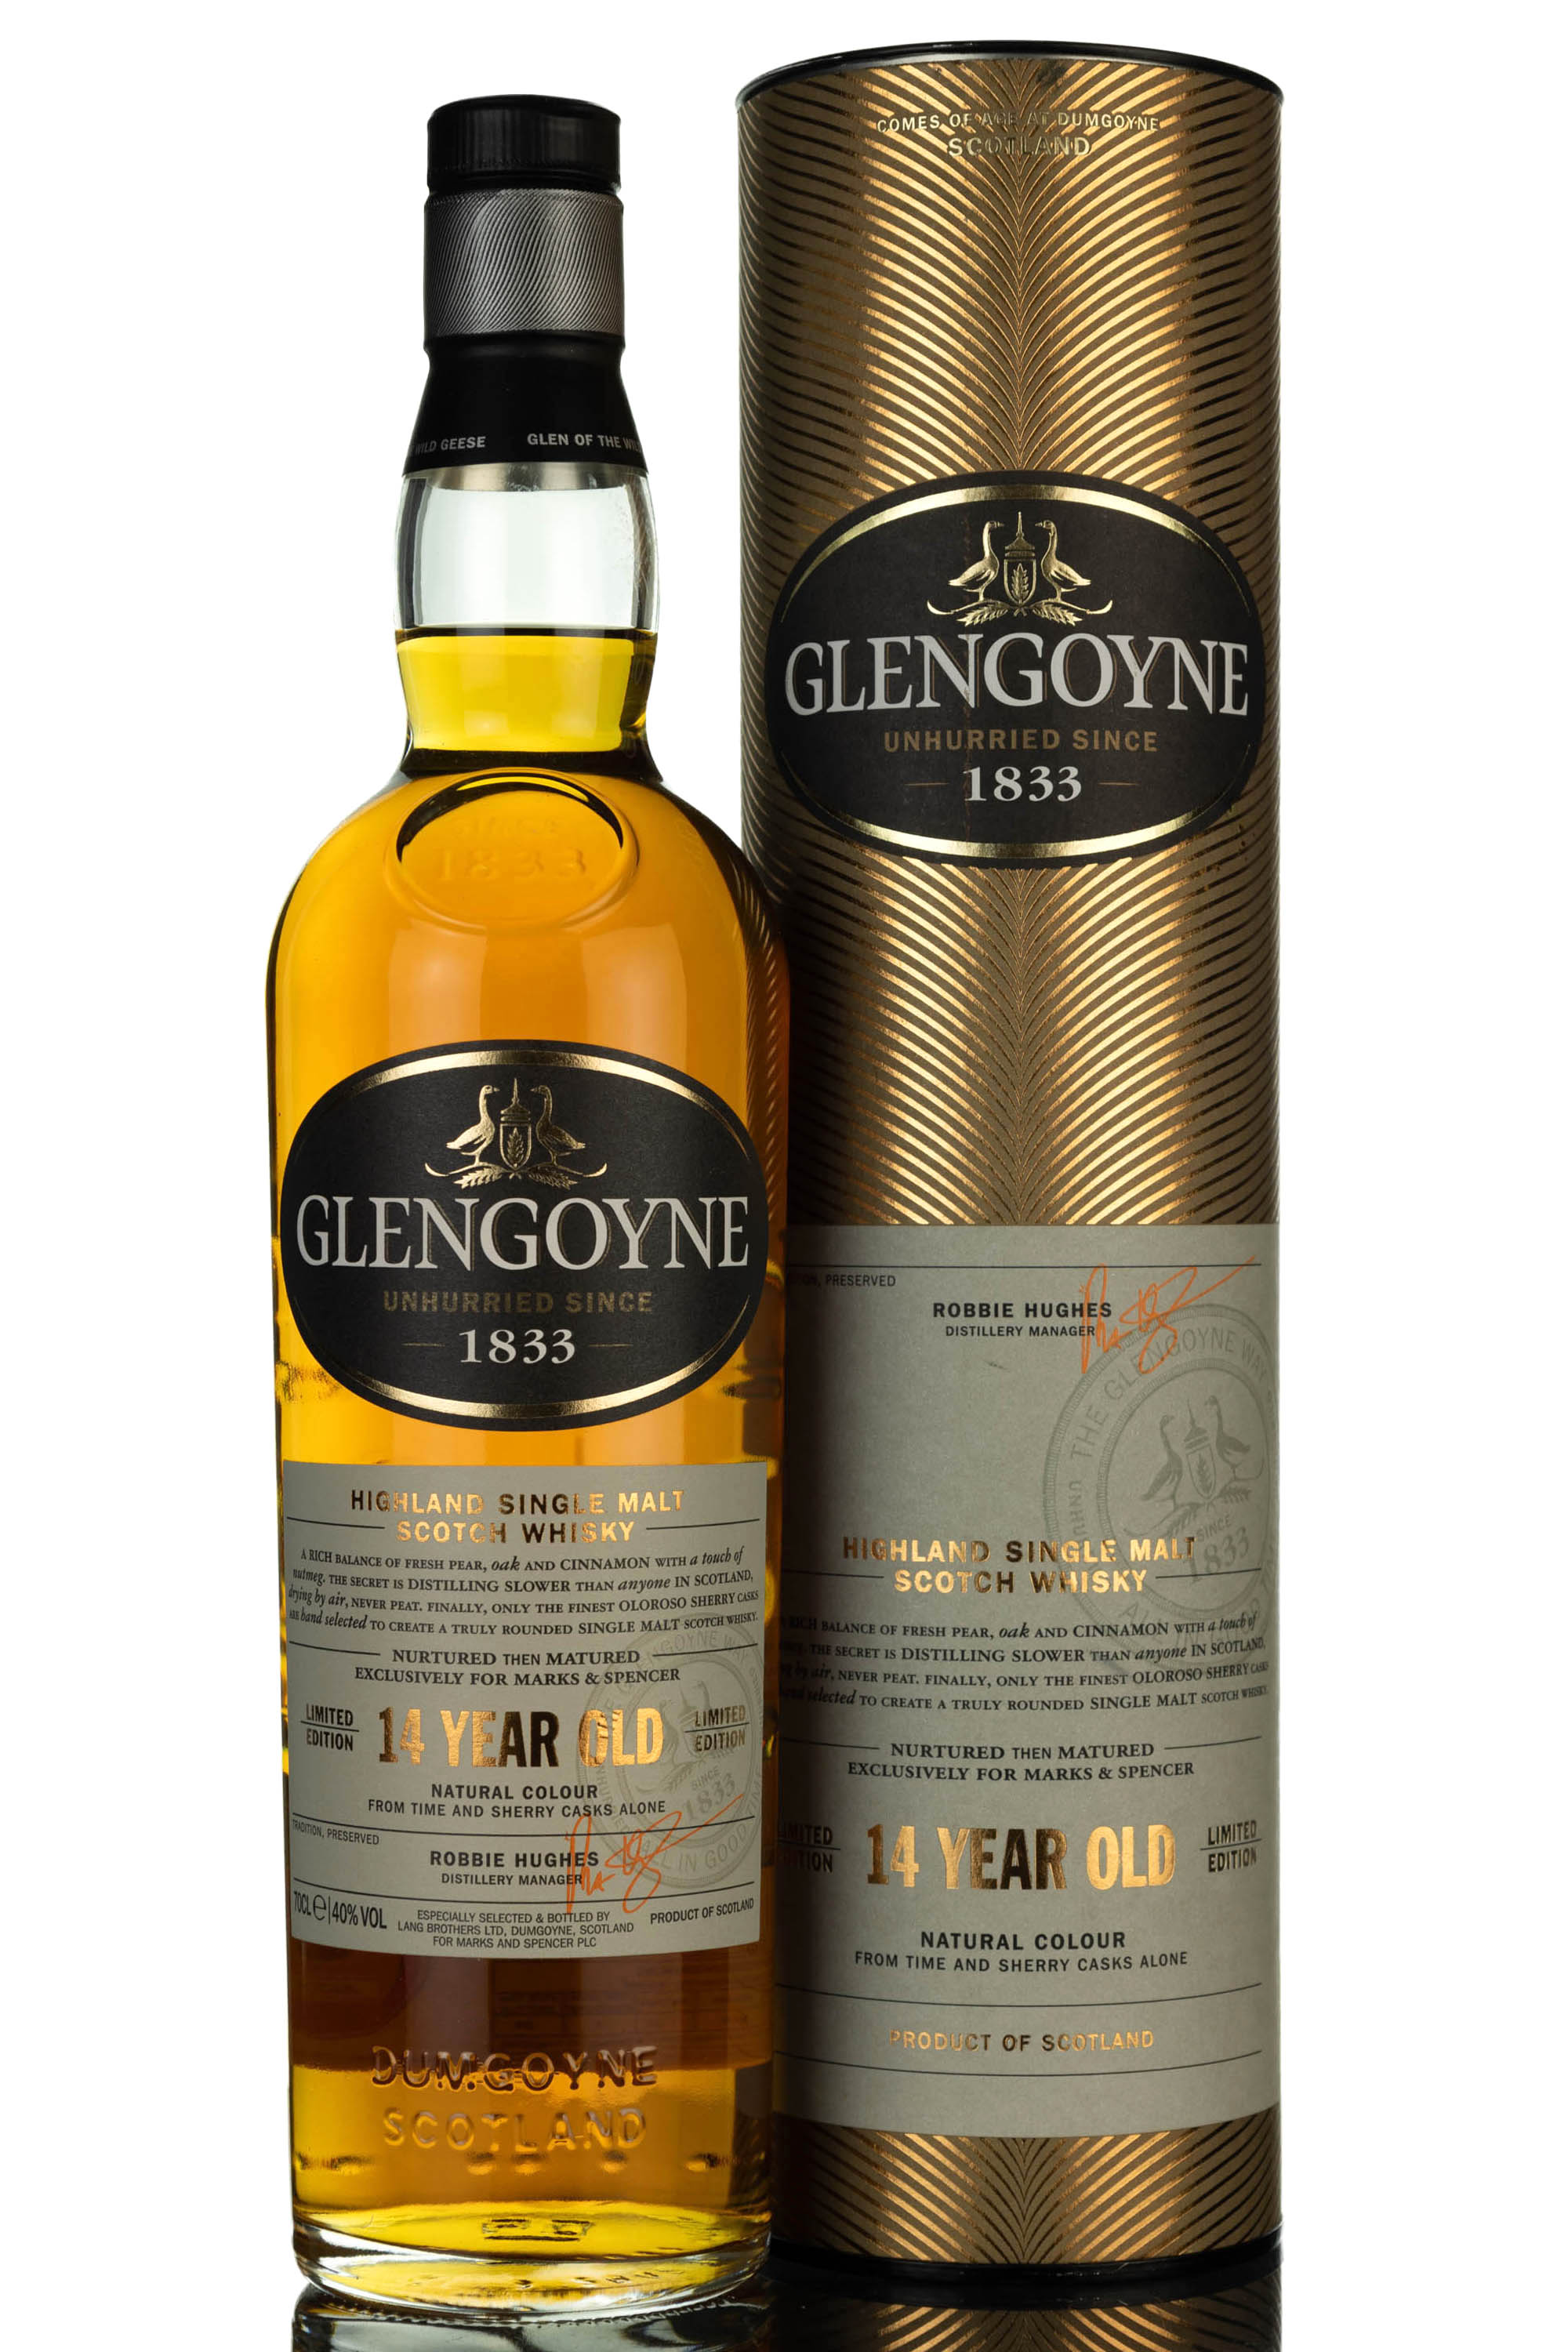 Glengoyne 14 Year Old - Limited Edition